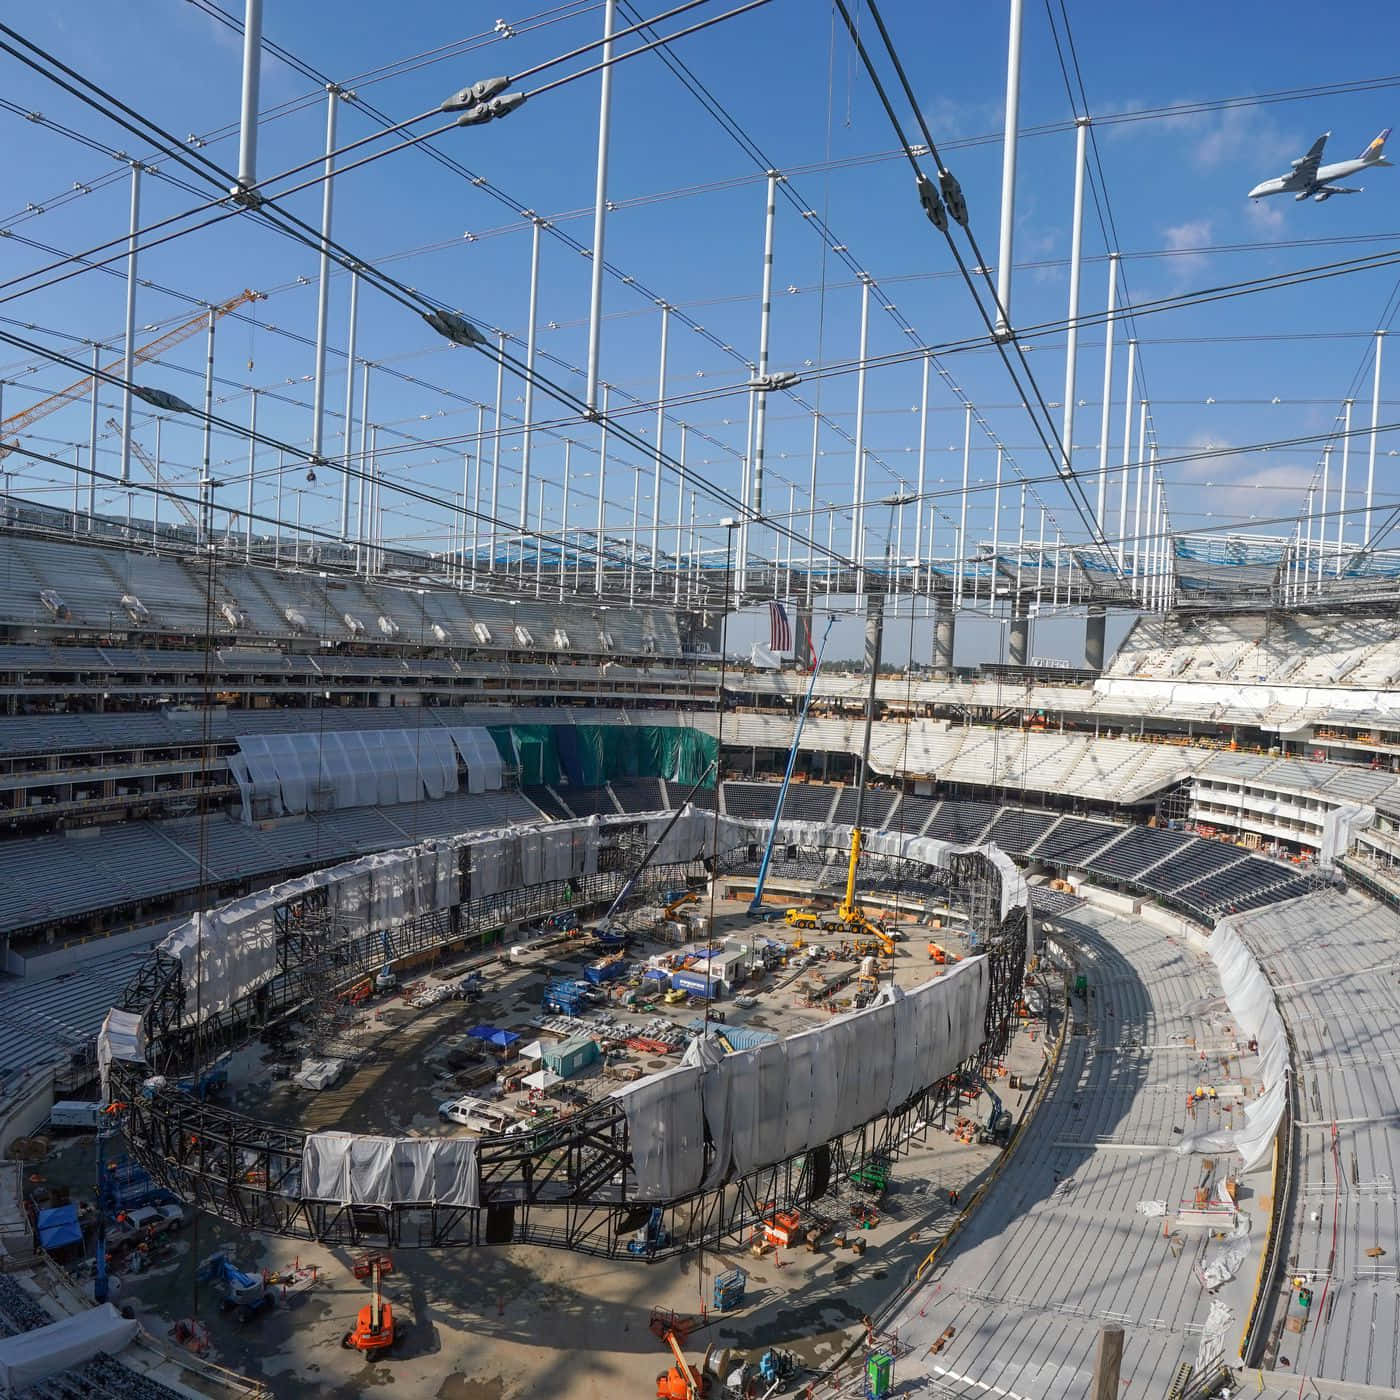 The Inside Of A Stadium Under Construction